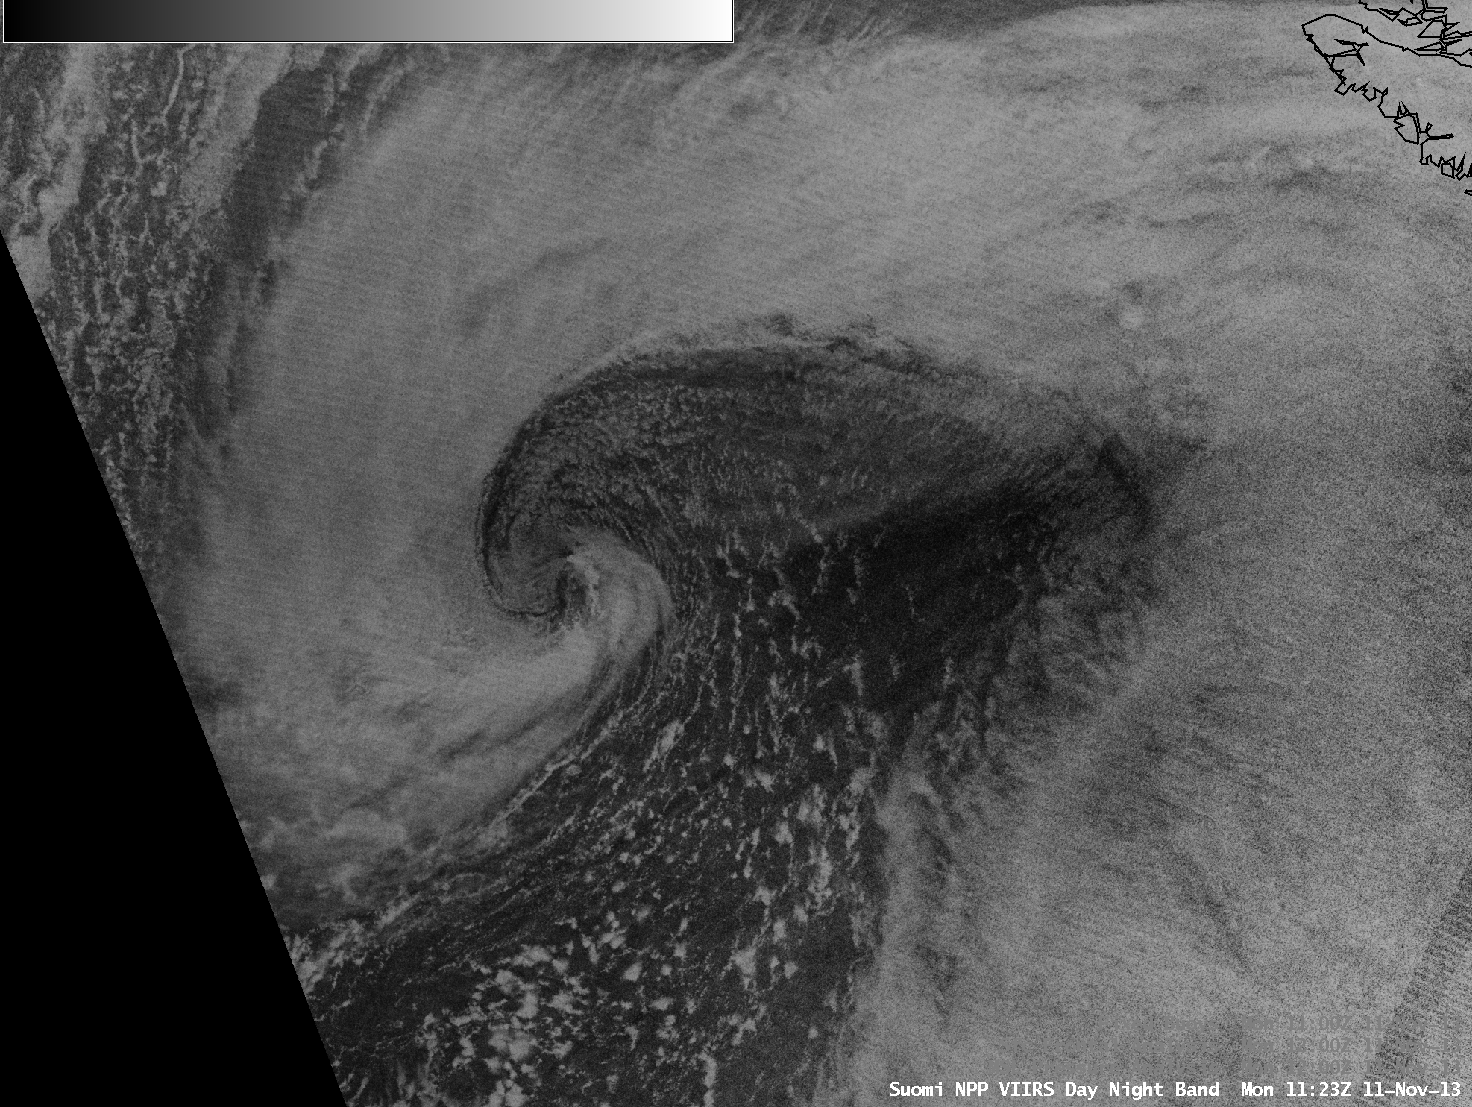 Suomi NPP VIIRS 0.7 Âµm Day/Night Band and 11.45 Âµm IR images, with surface analysis and buoy reports